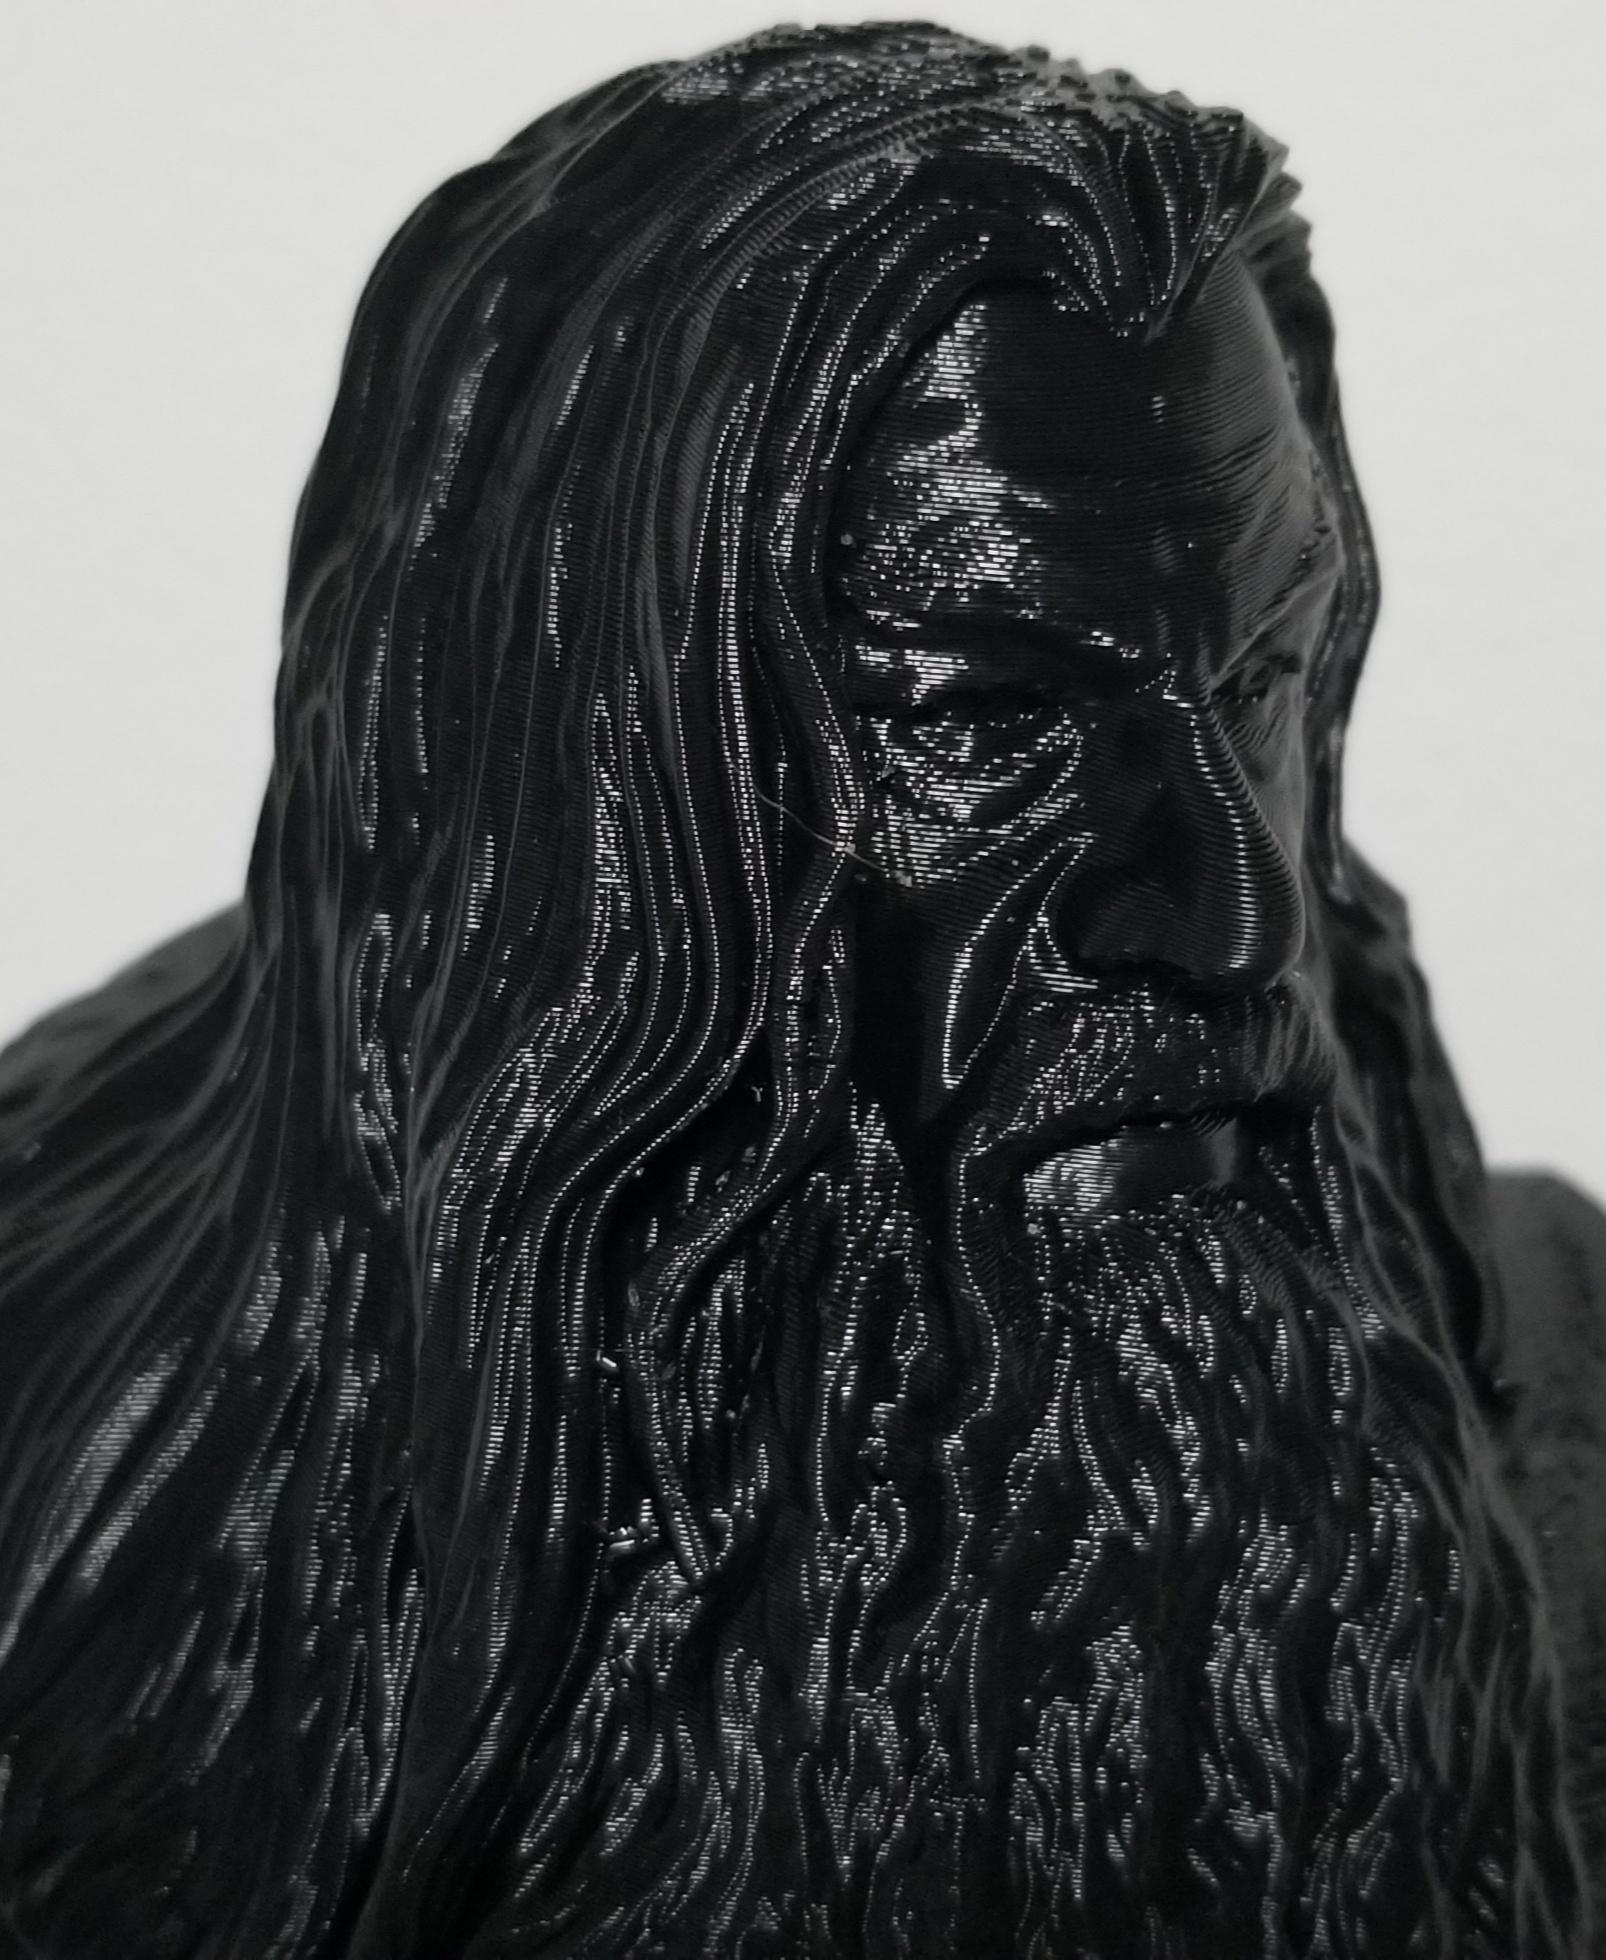 Gandalf Bust - Lord of the Rings (Pre-Supported) 3d model